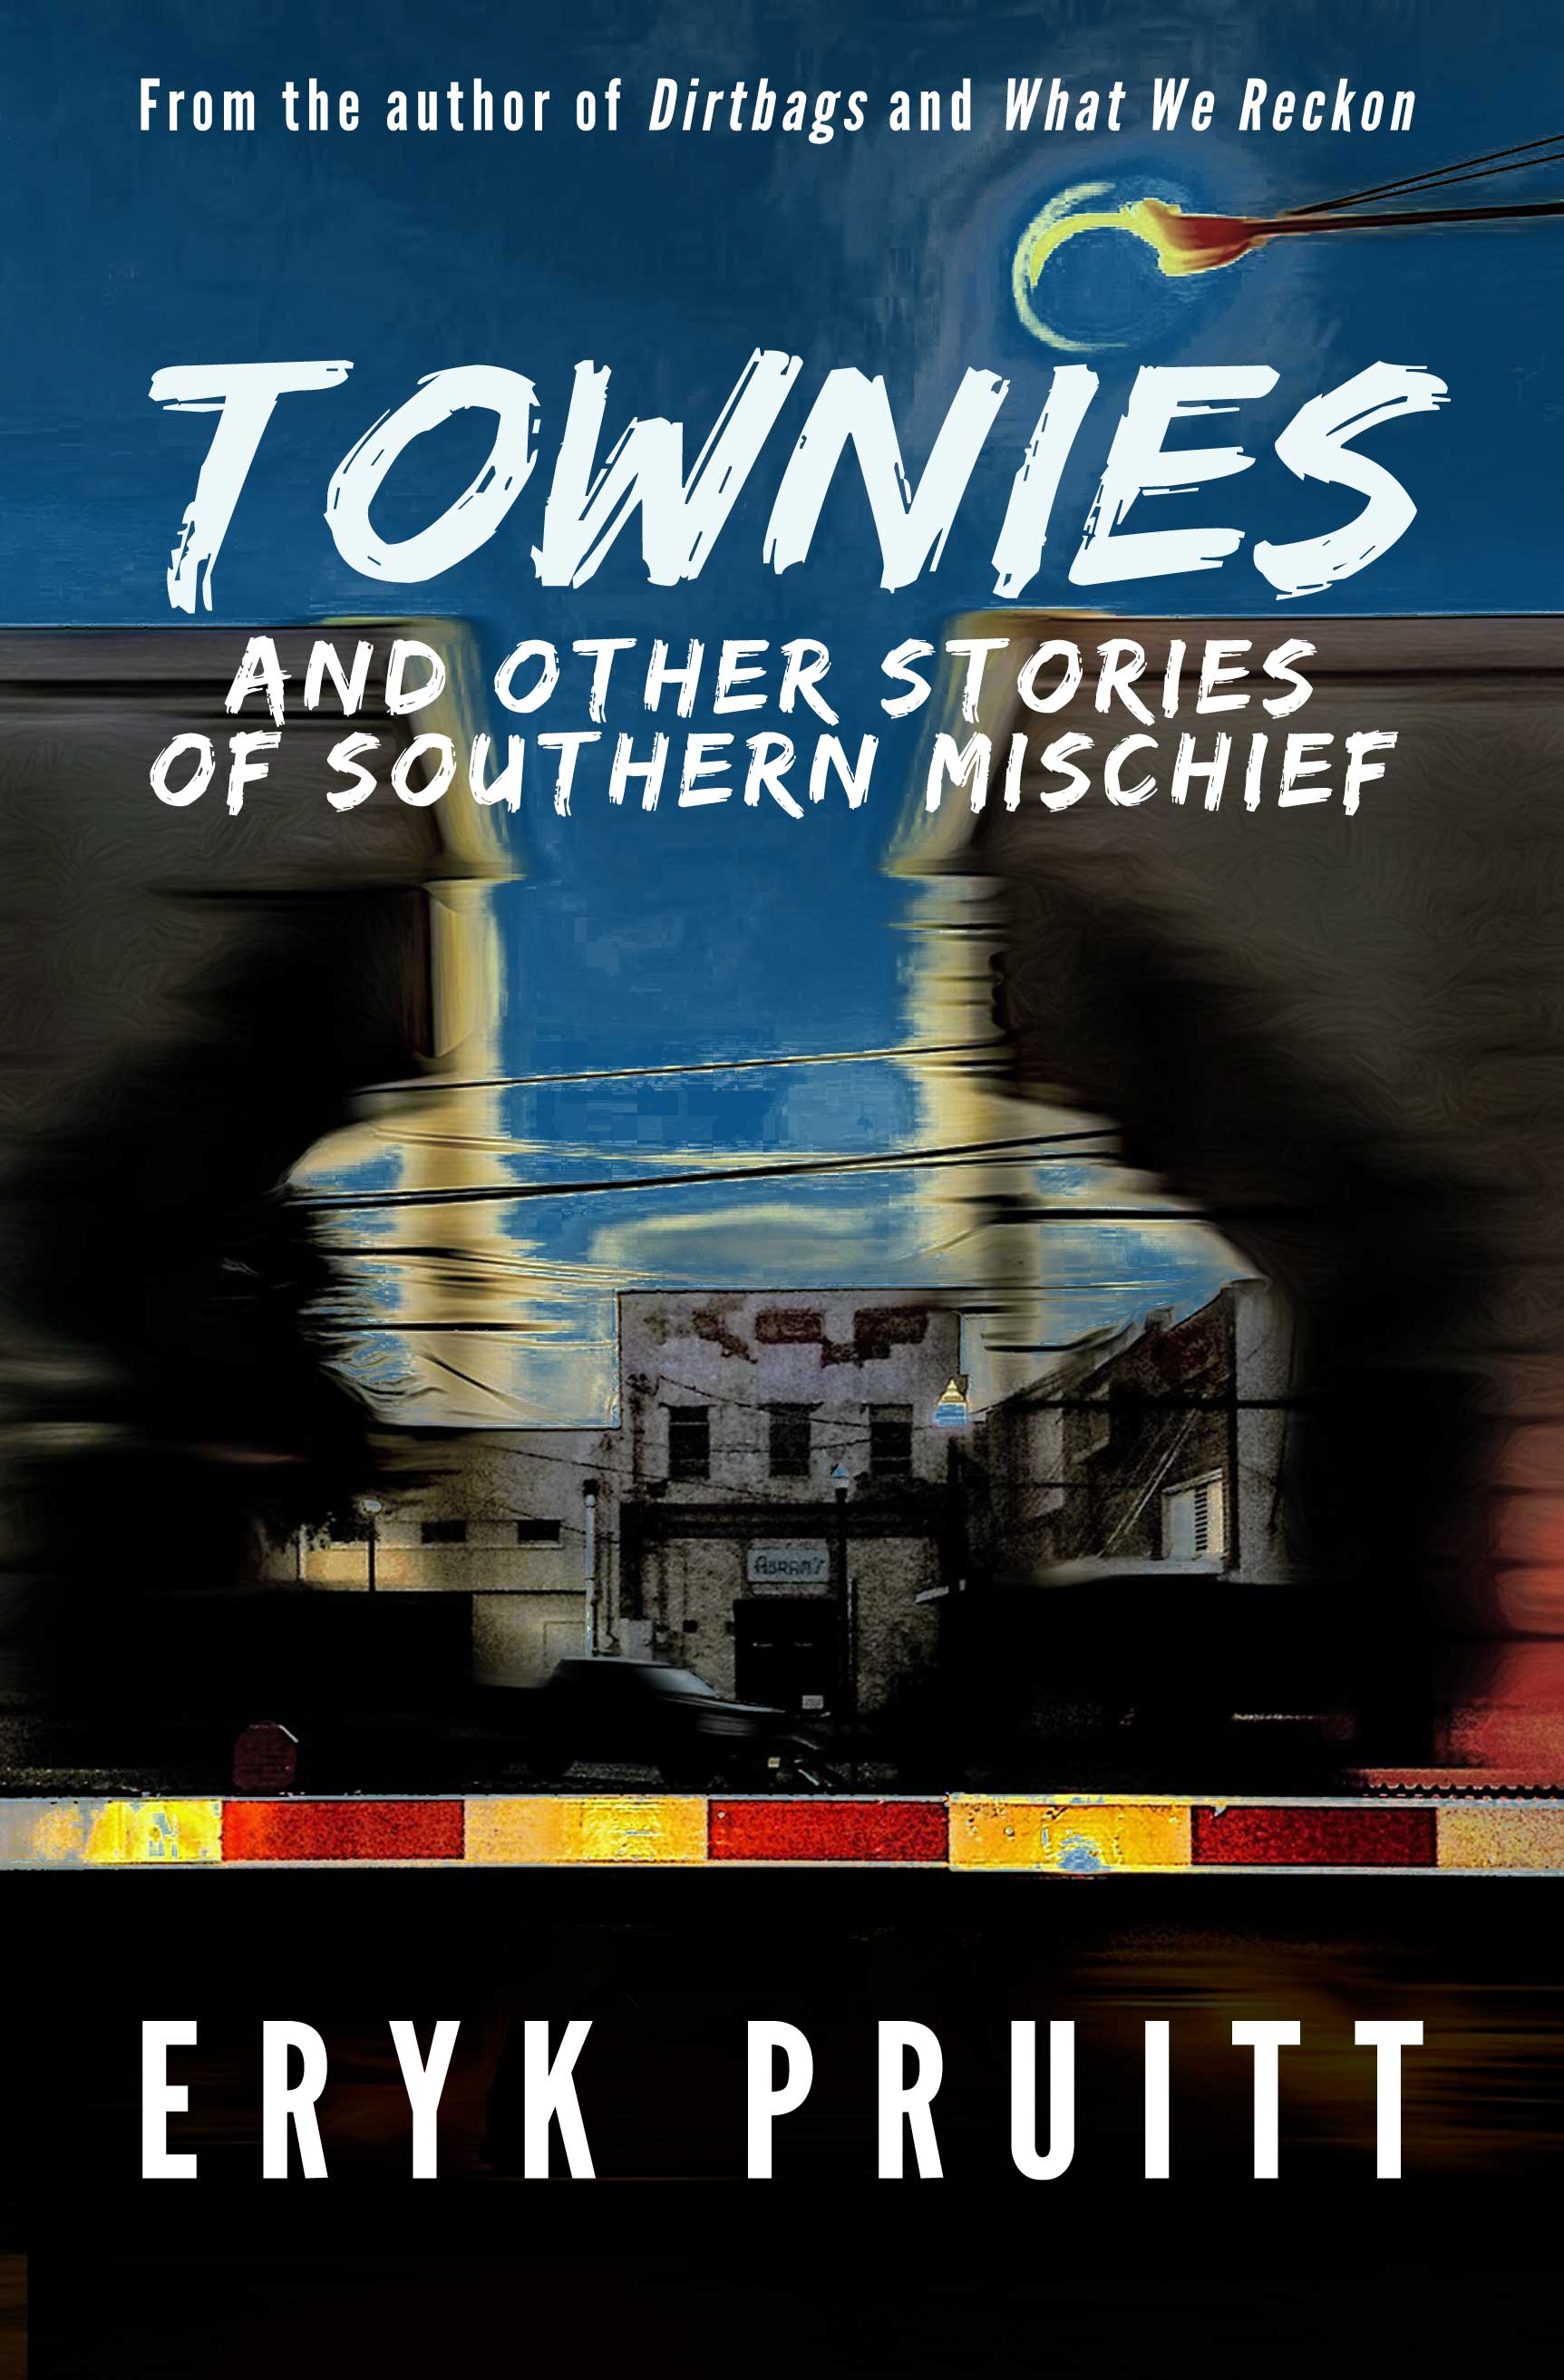 Townies and Other Southern Noir Tales